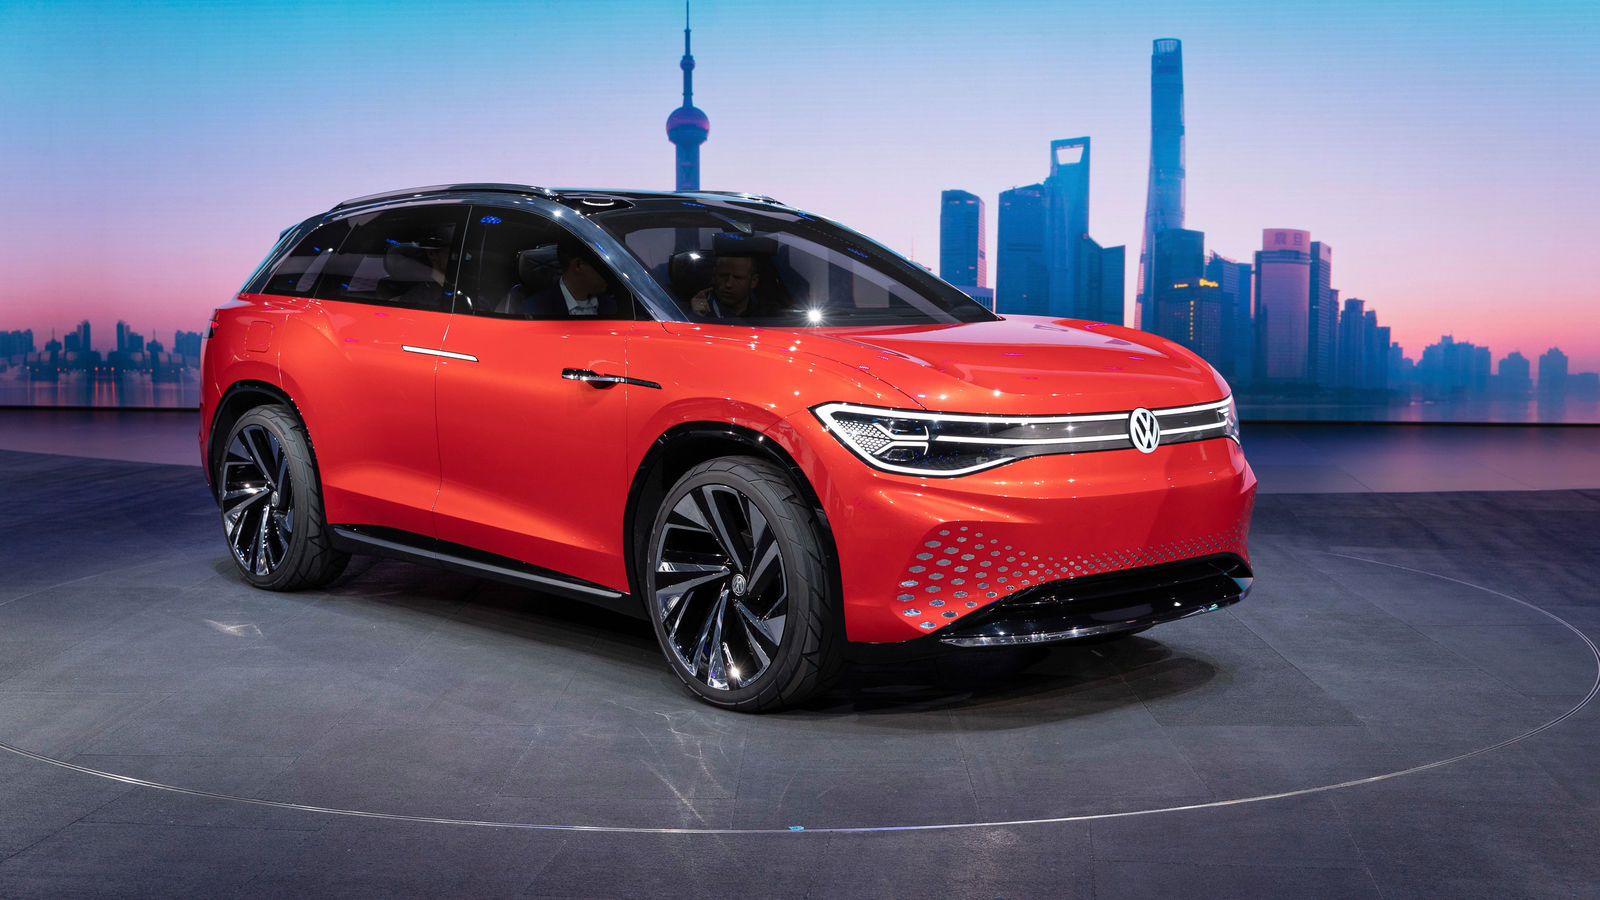 Volkswagen Press Conference at Shanghai Auto Show 2019